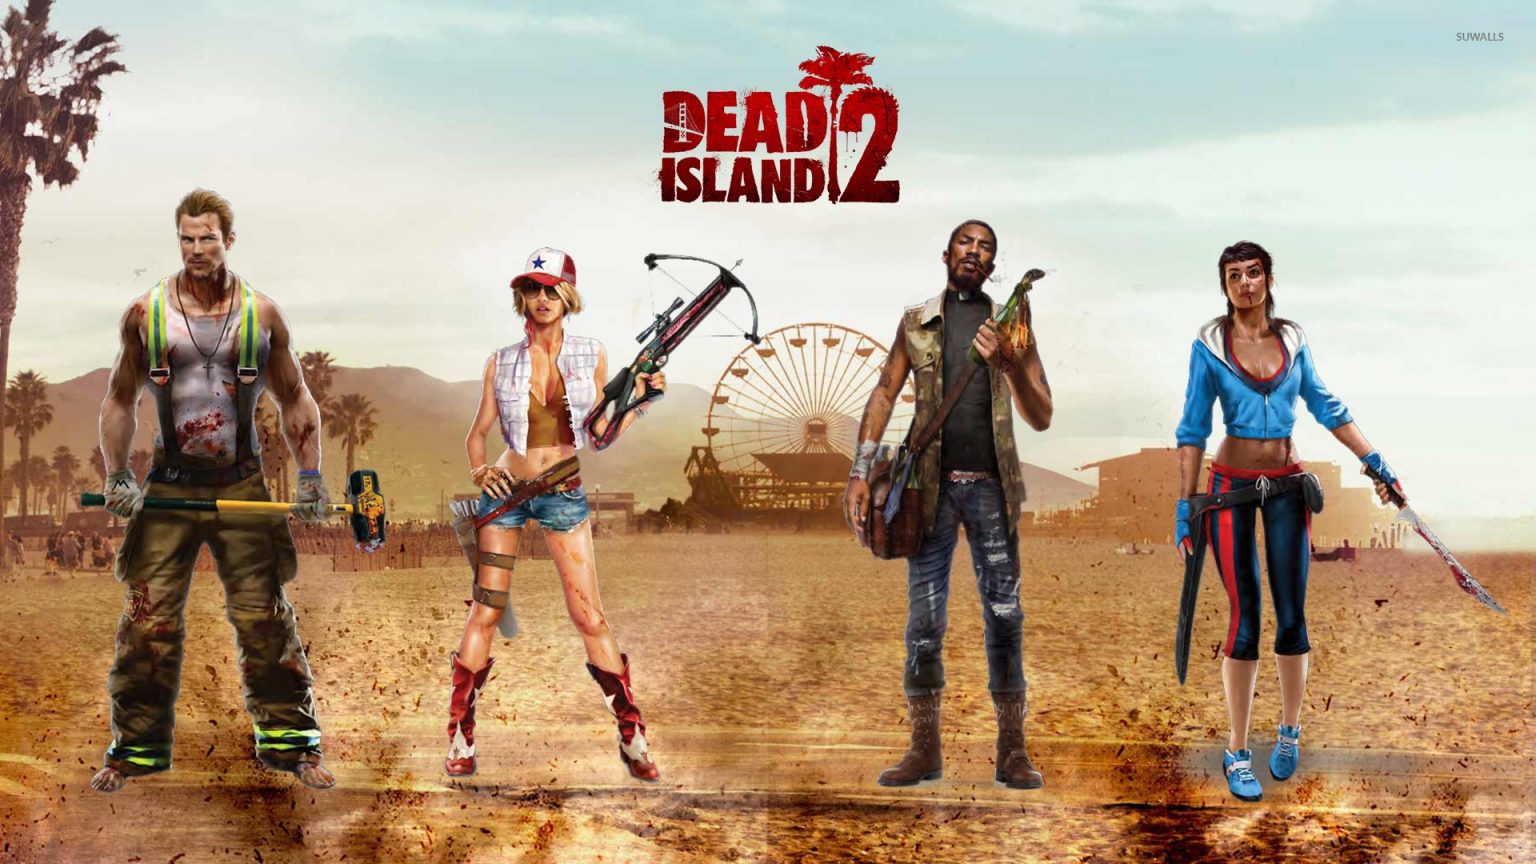 is dead island 2 ever coming out